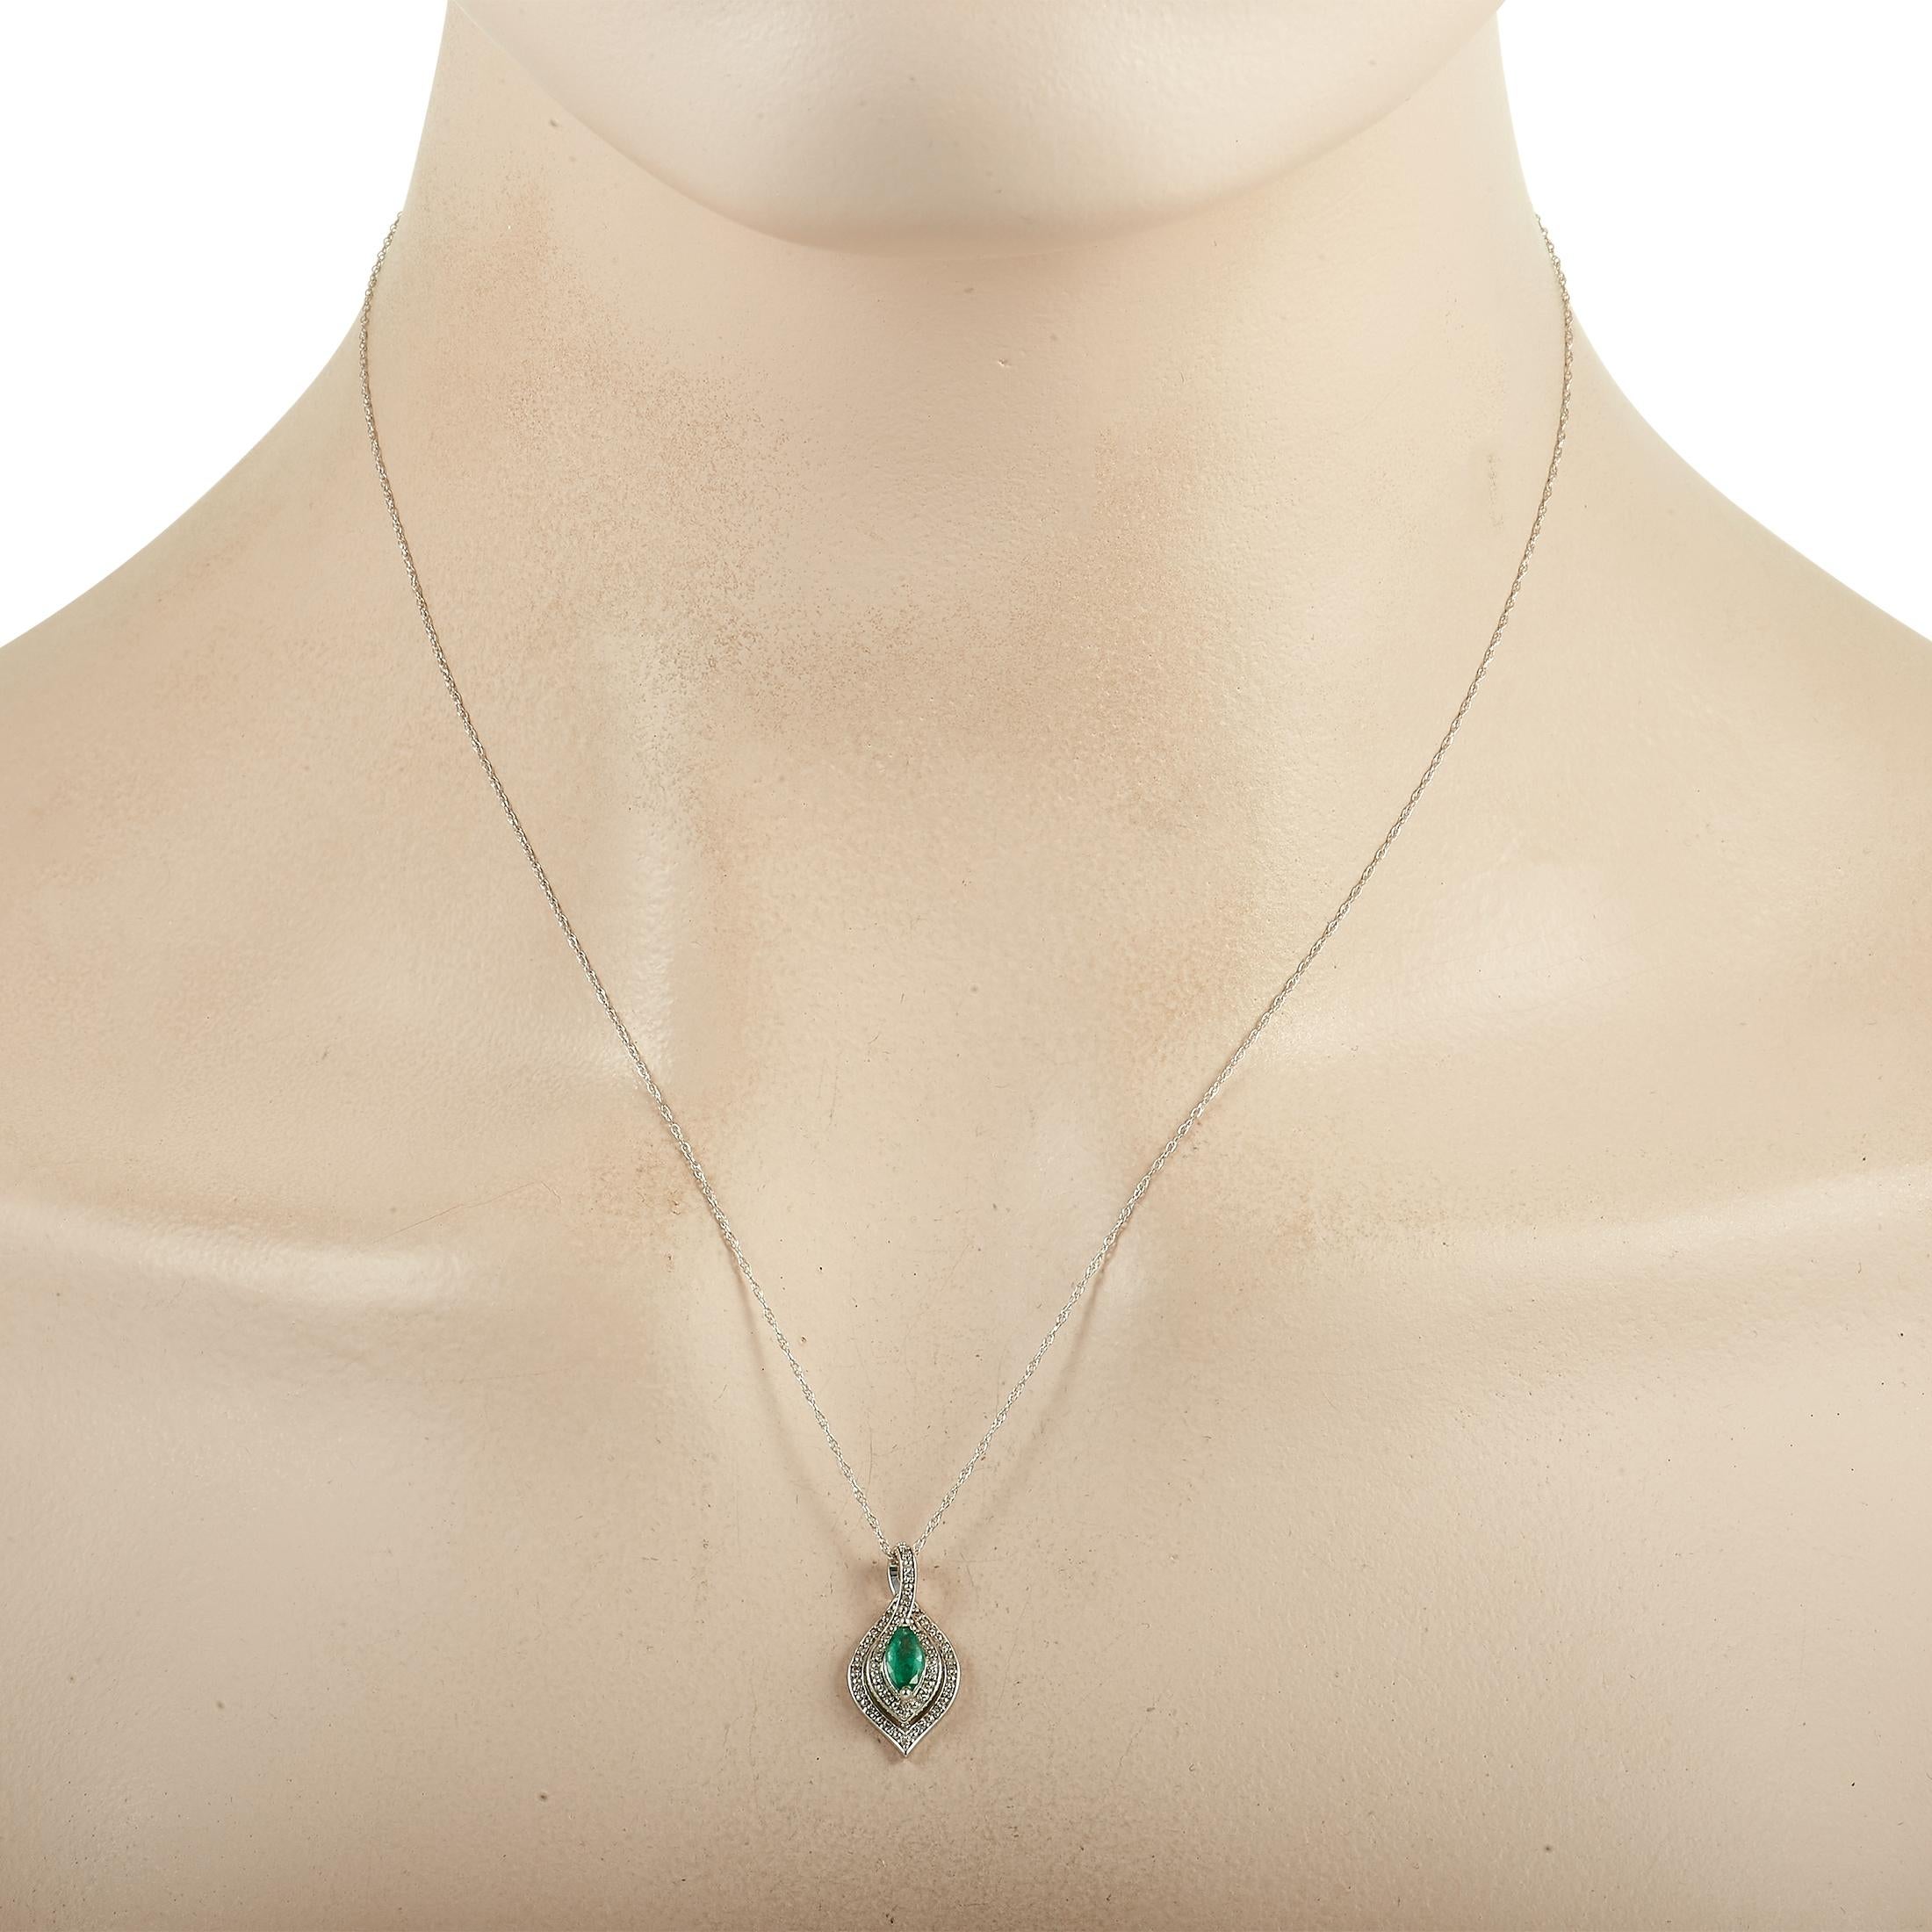 Add a touch of color and luxury to any ensemble with this classically elegant necklace. Suspended from a textured 17.5” chain, you’ll find a 14K White Gold pendant measuring 0.75” long and 0.45” wide. It’s covered in diamonds totaling 0.08 carats